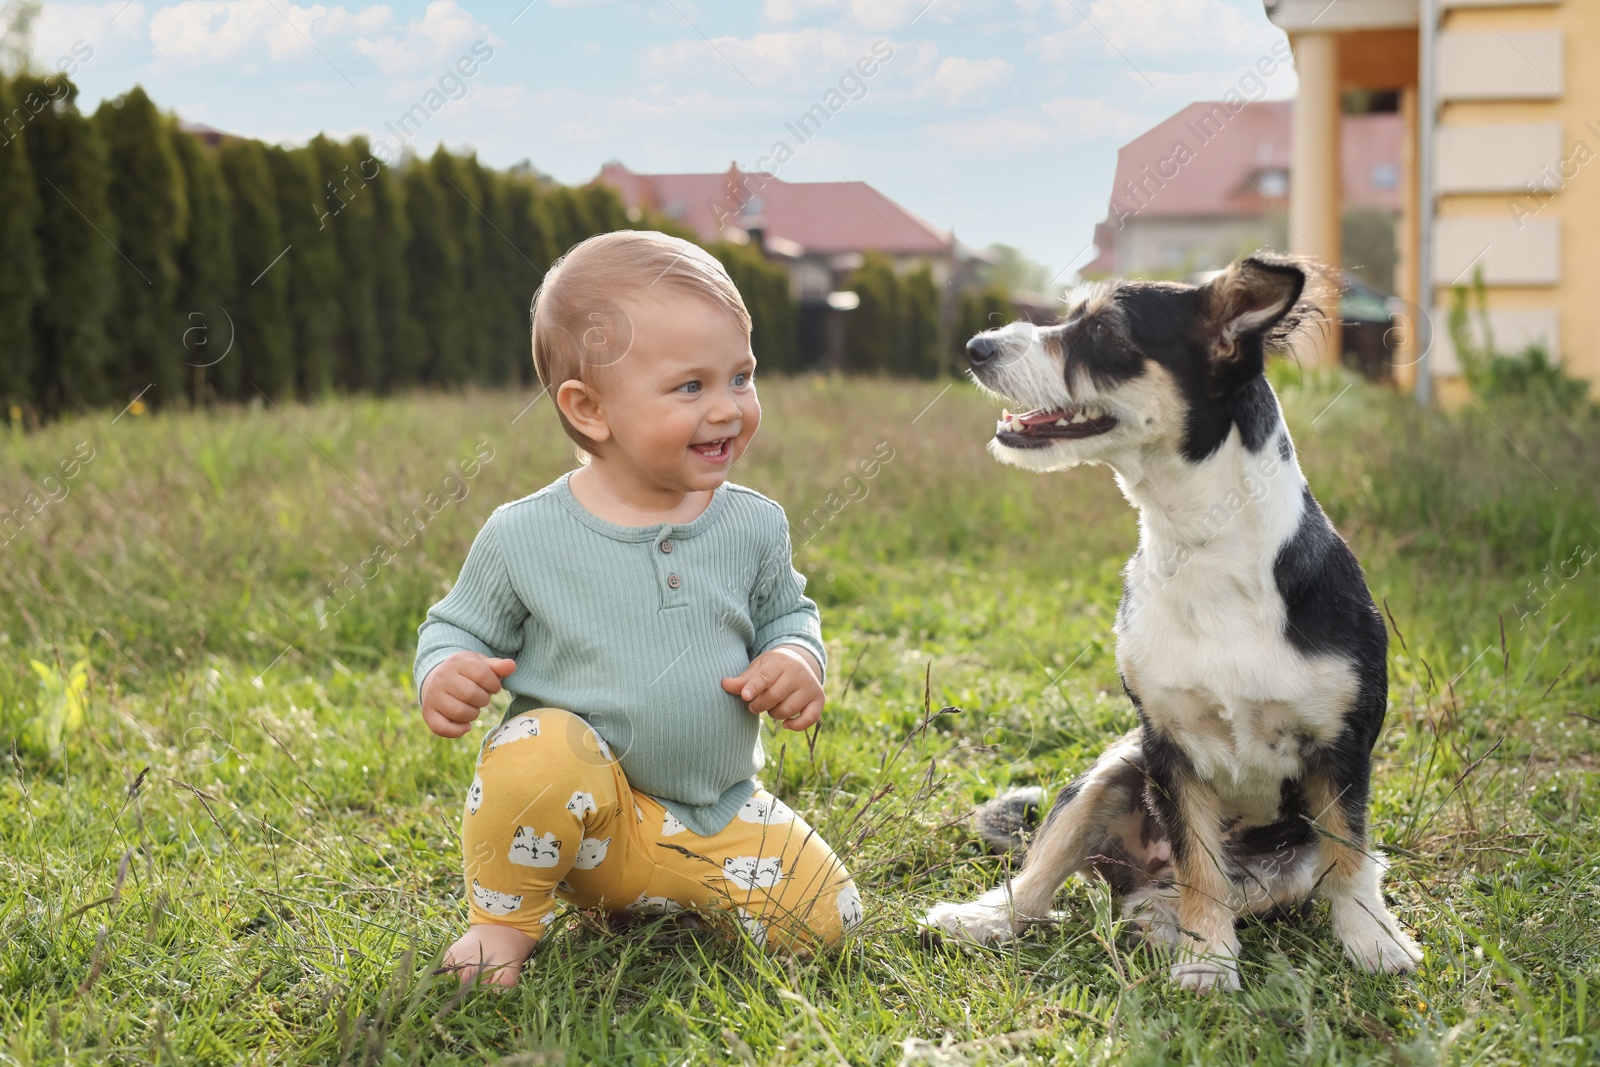 Photo of Adorable baby and furry little dog on green grass outdoors